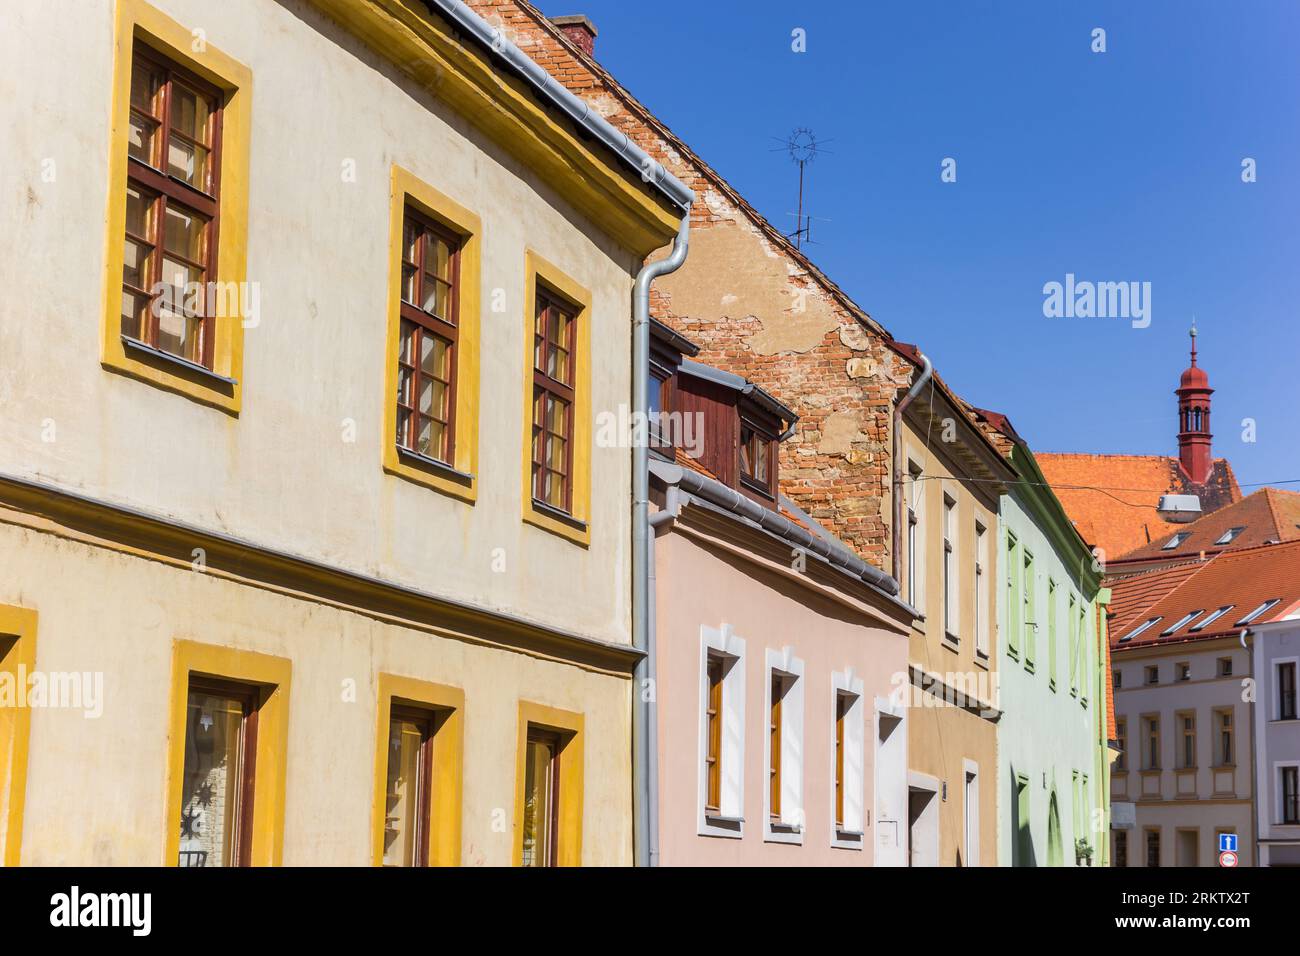 Facades of colorful houses in the historic town Znojmo, Czech Republic Stock Photo